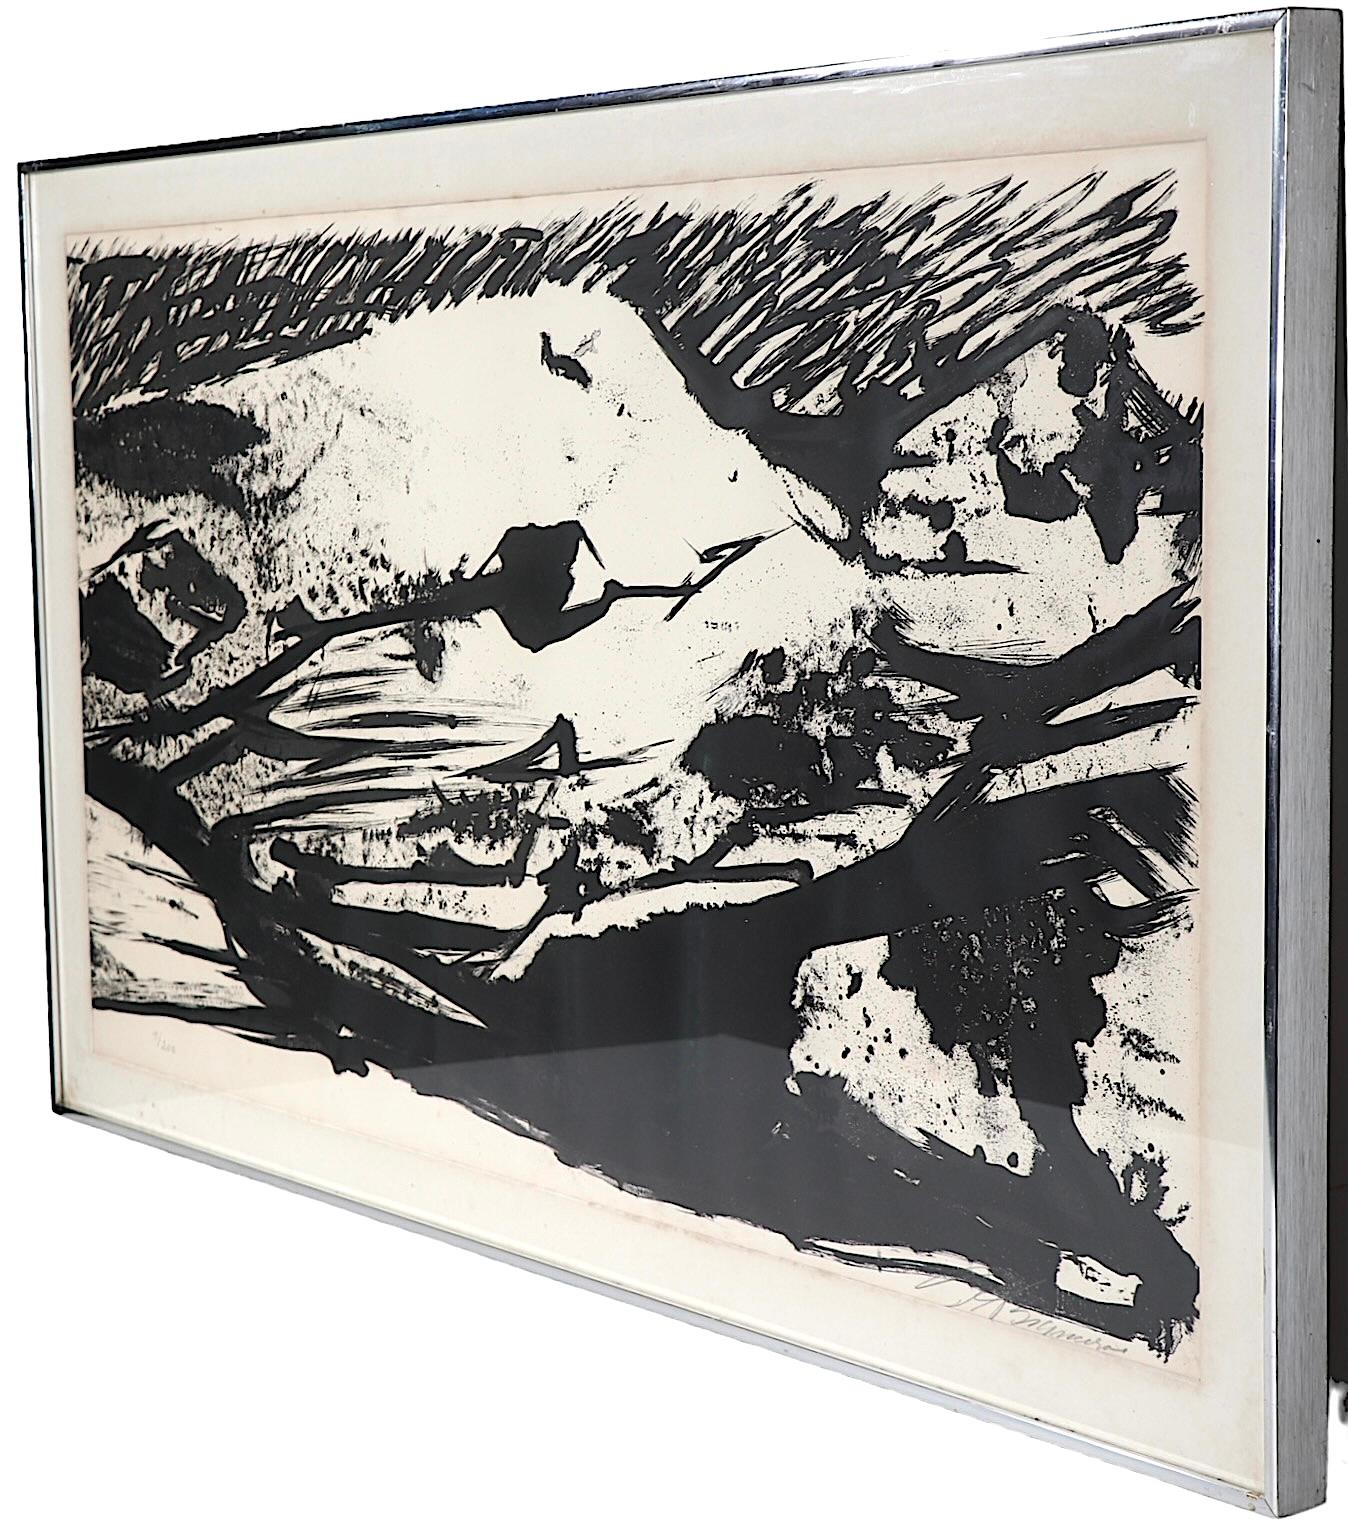 Mexican Print Framed by David Siqueliros from the Pablo Neruda Series  1950/1960 For Sale 1